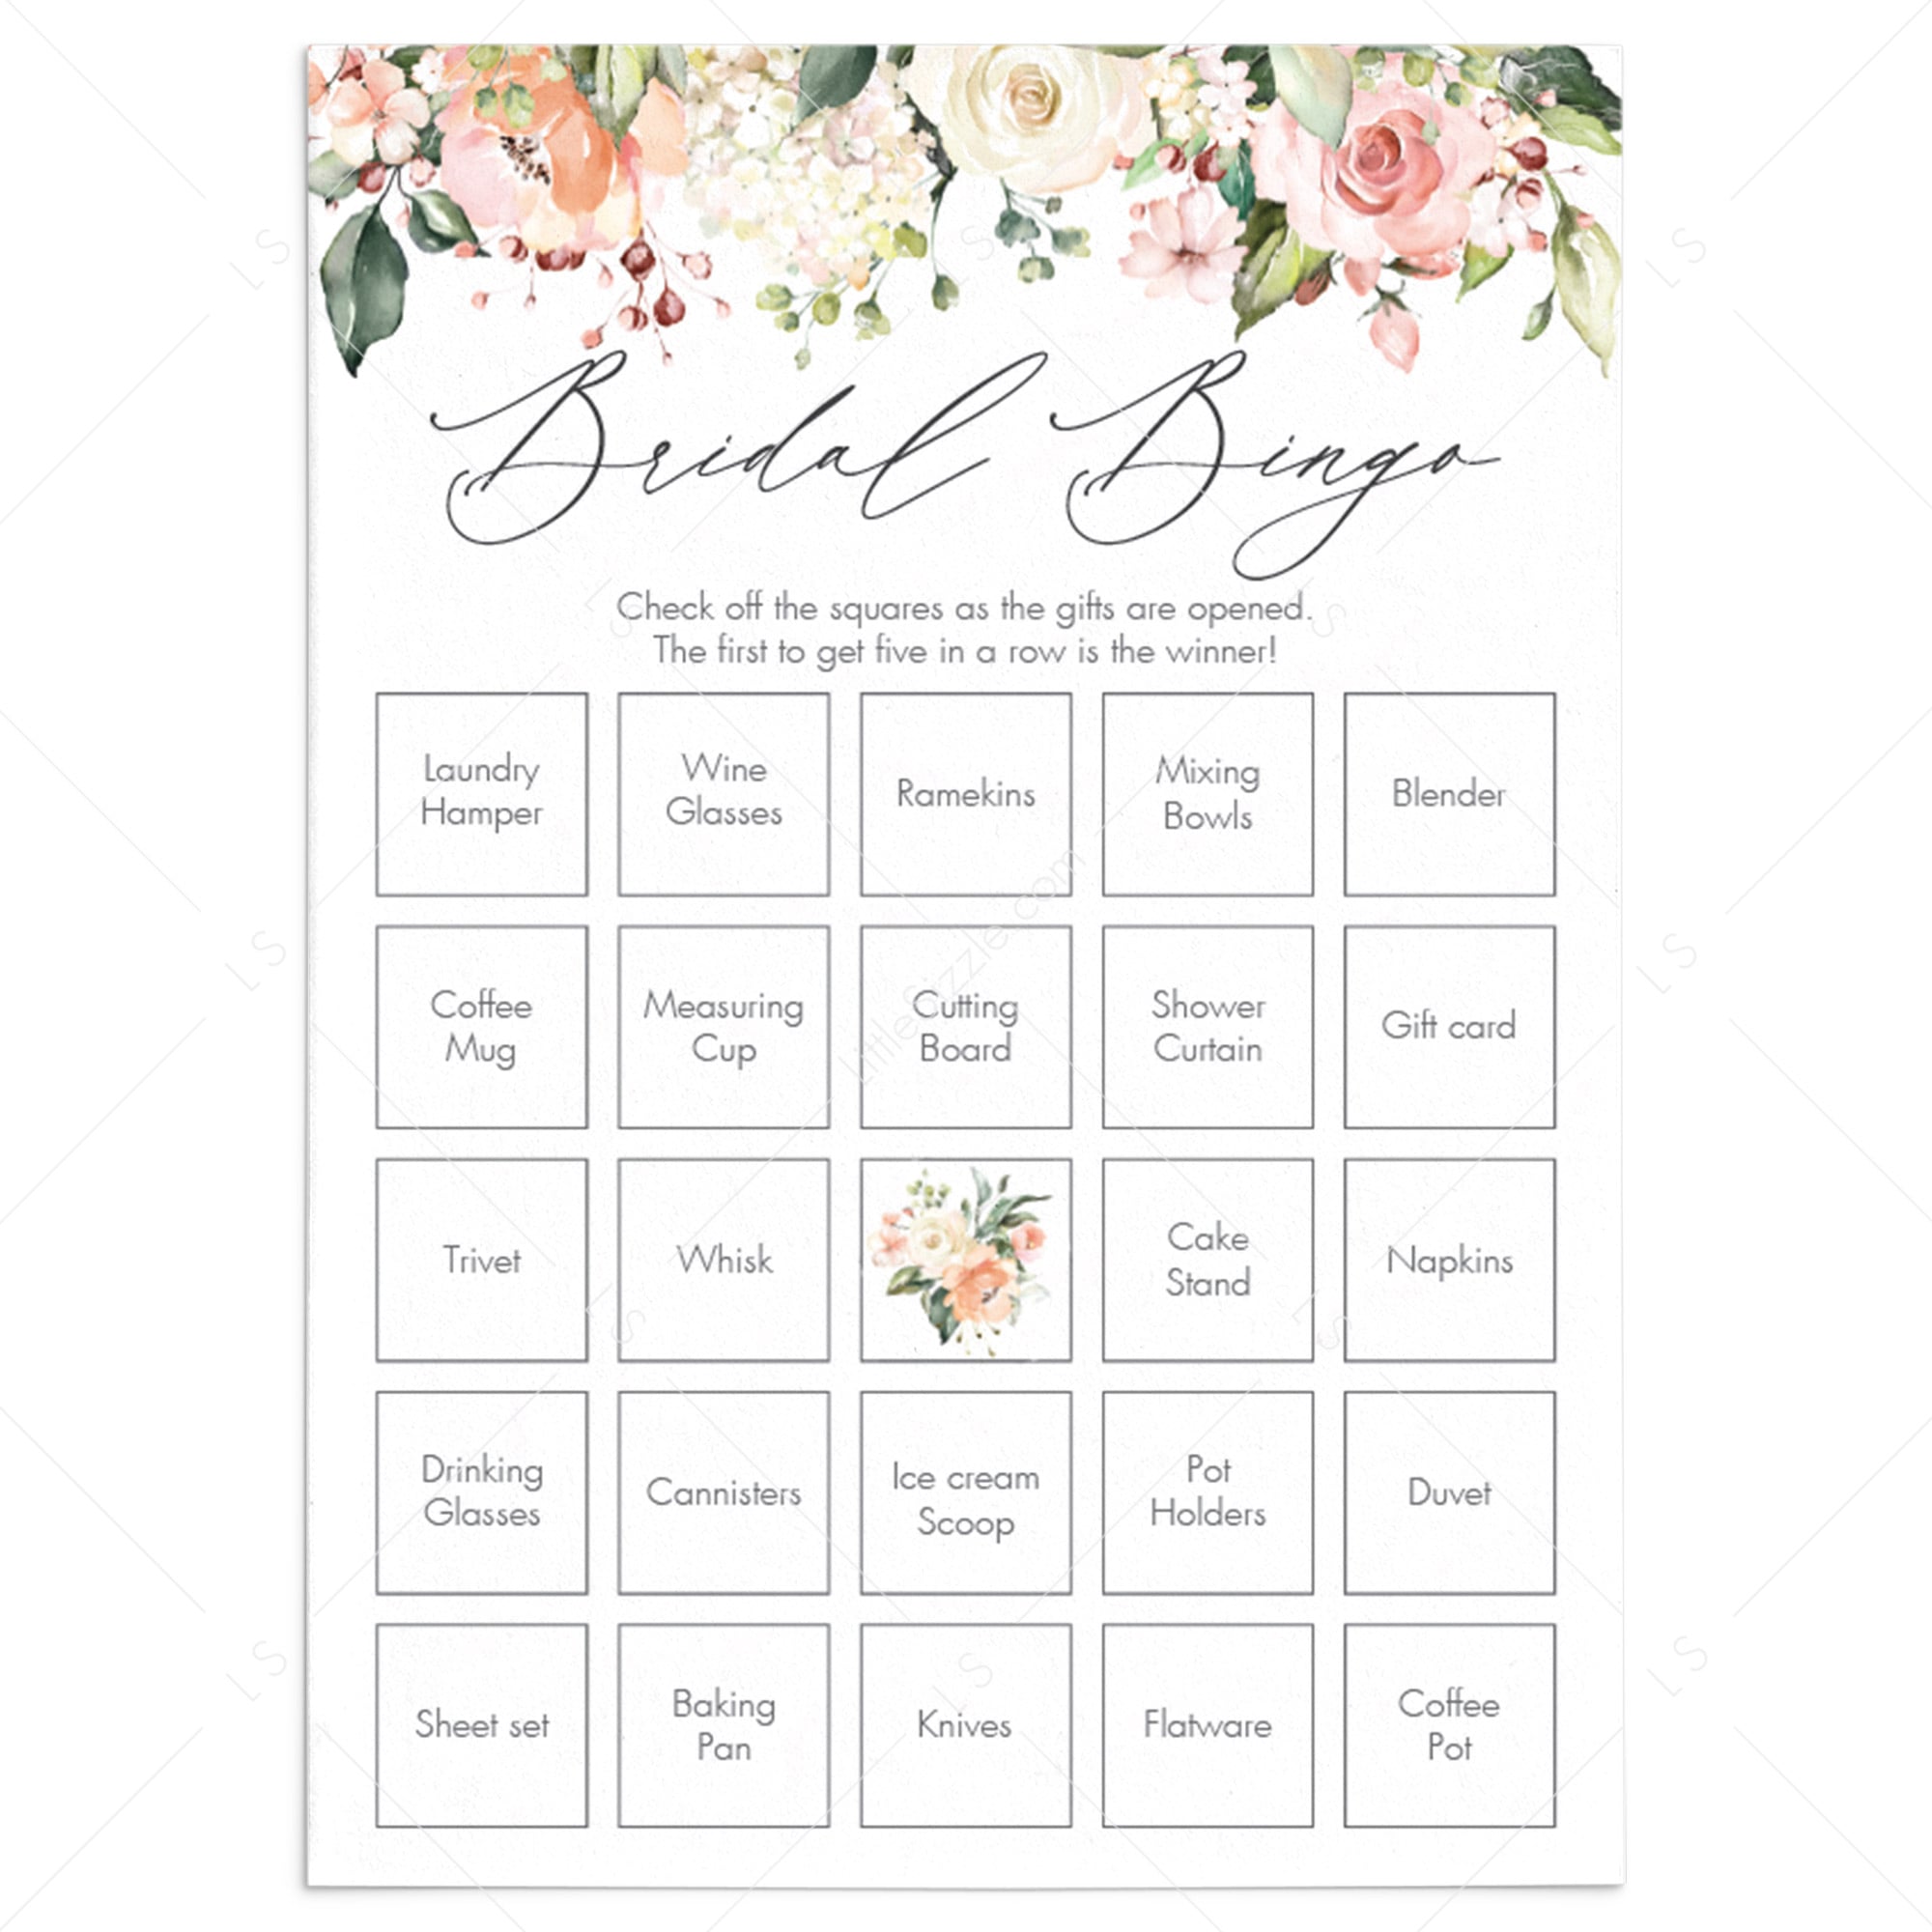 Soon To Be Mrs. - Bridal Shower Gifts For Bride Art Board Print